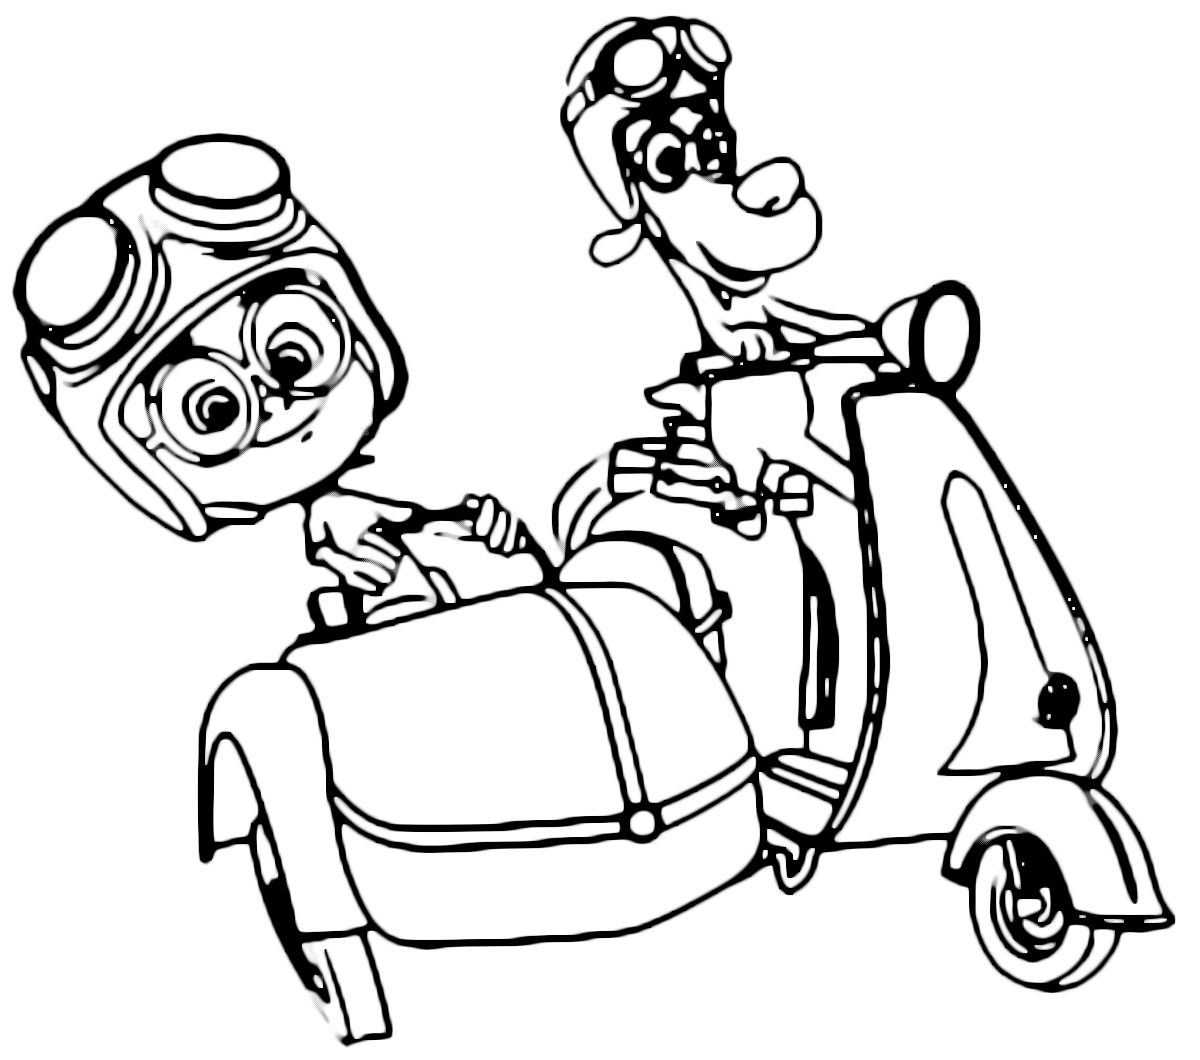 Mr Peabody & Sherman - Mr Peabody and Sherman together on the sidecar